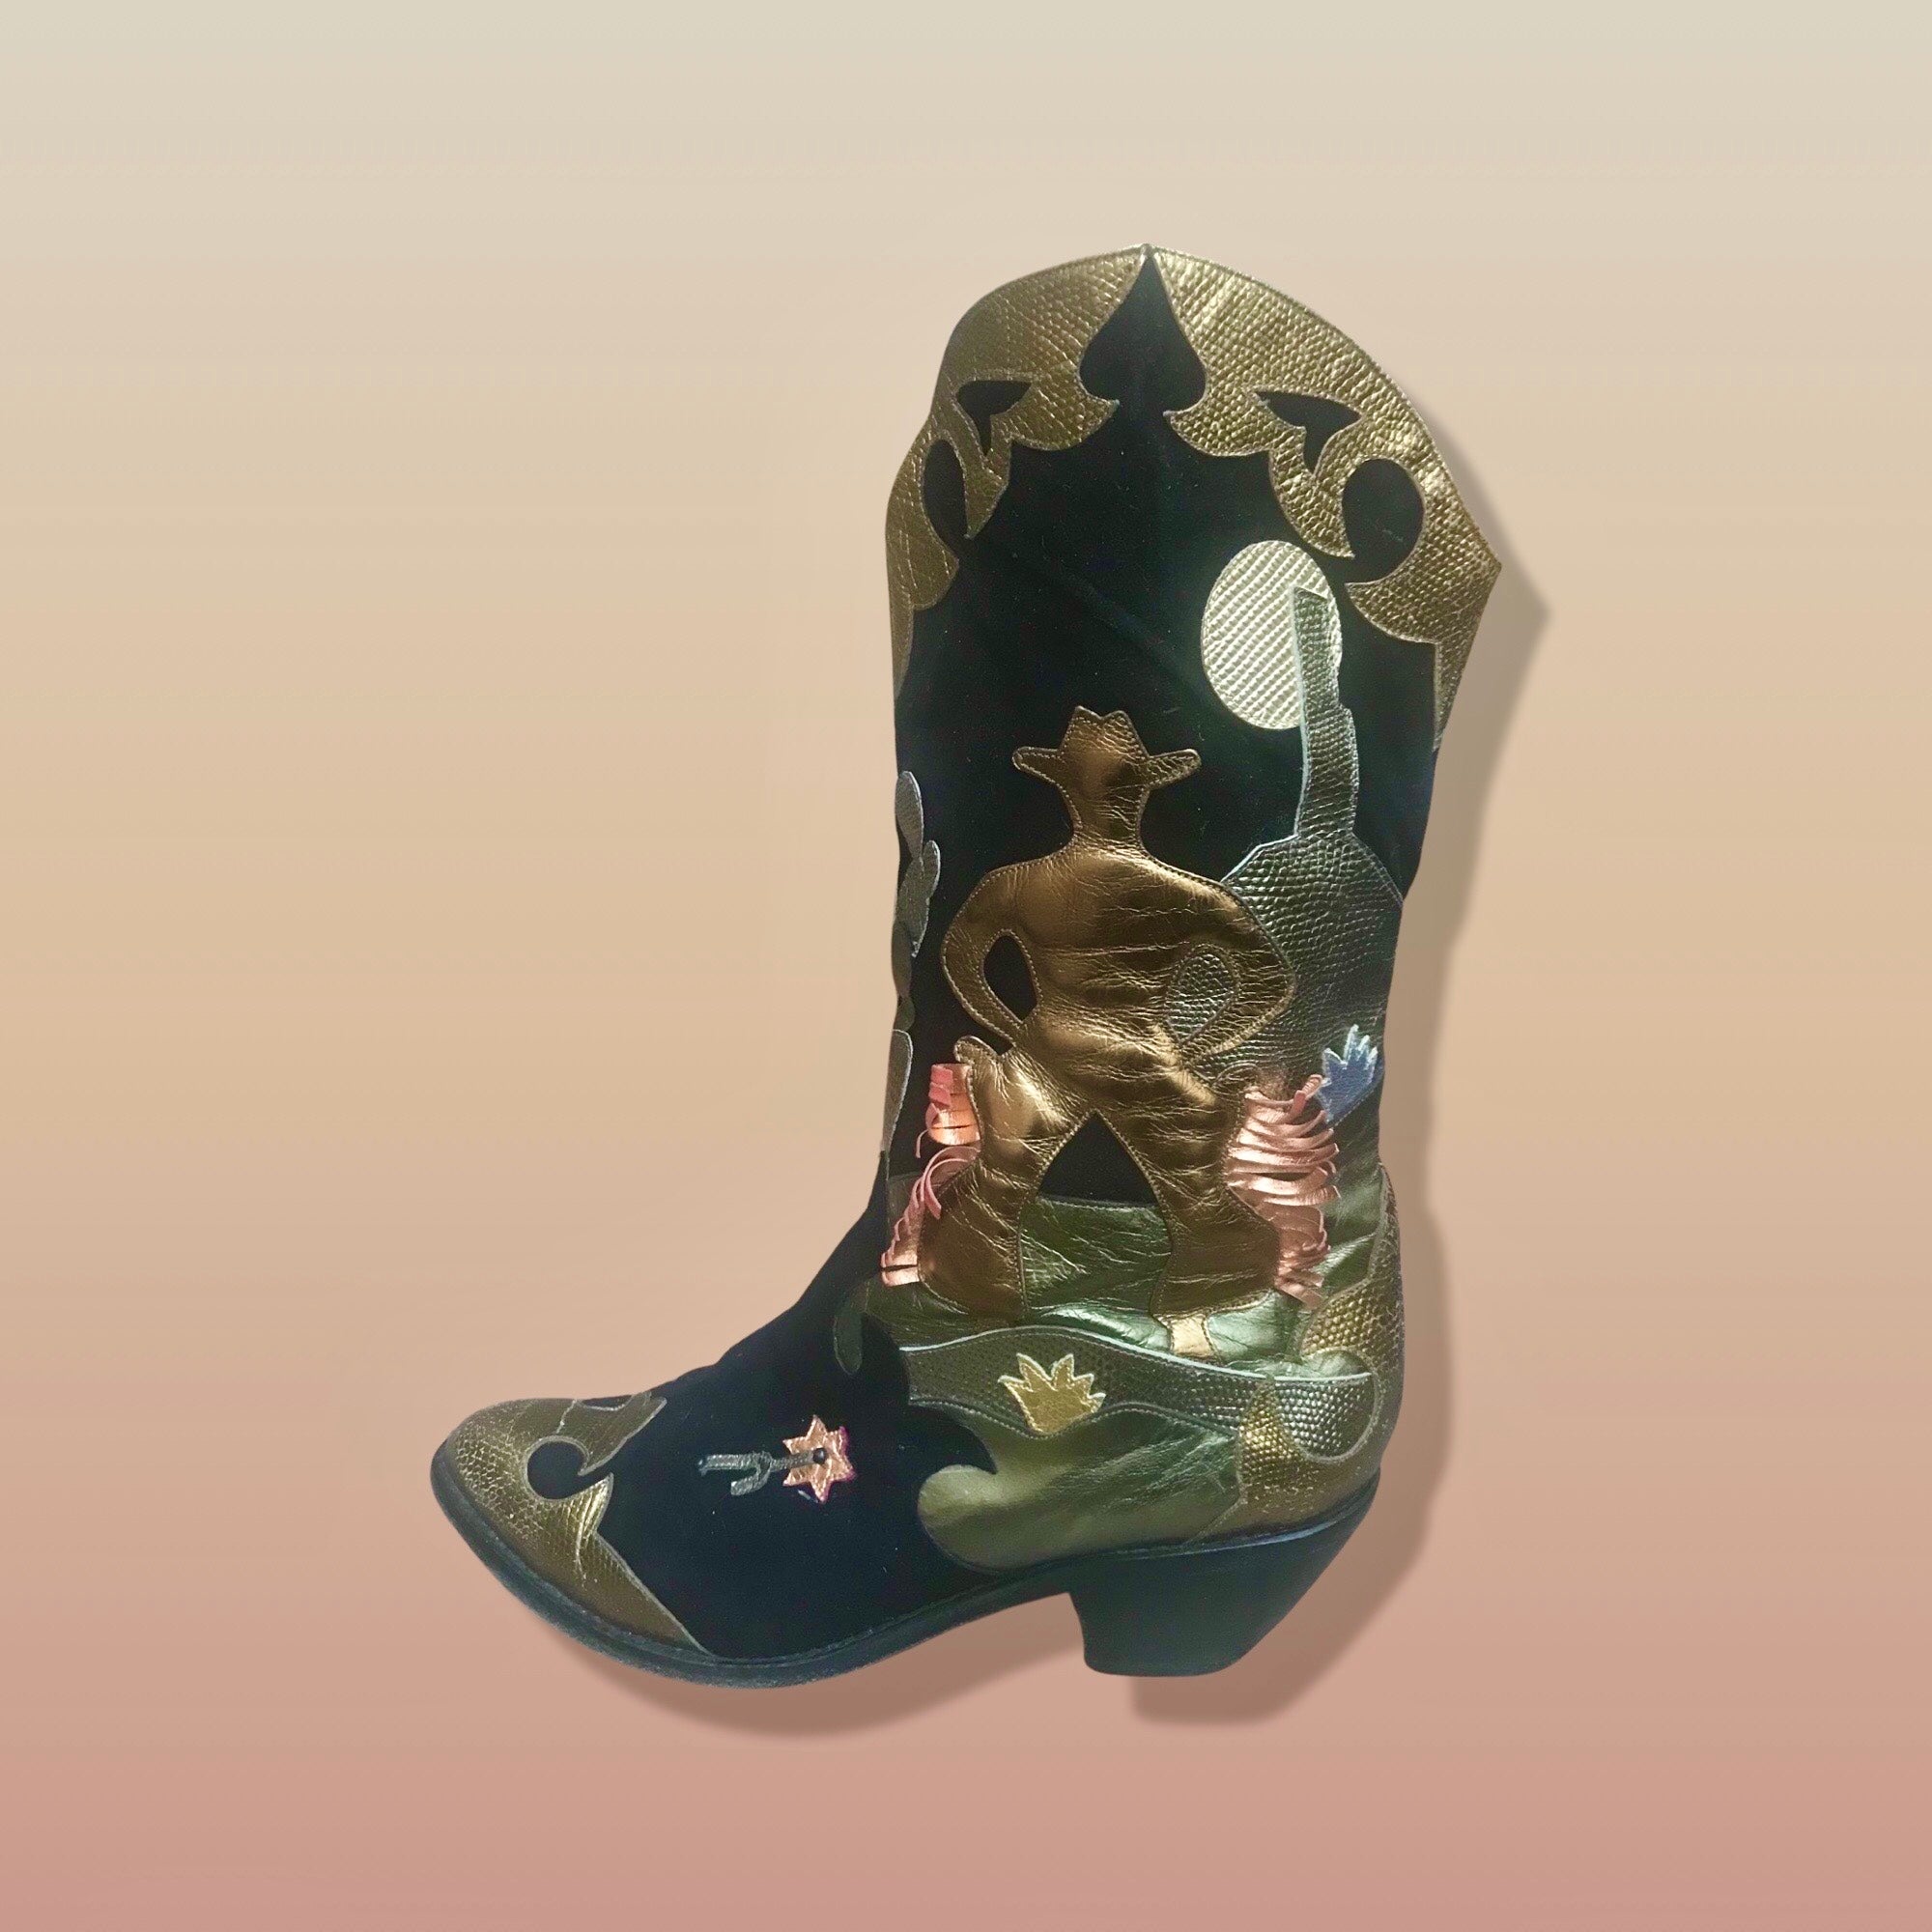 We're Dropping a Space Cowboy-Inspired Moon Boot